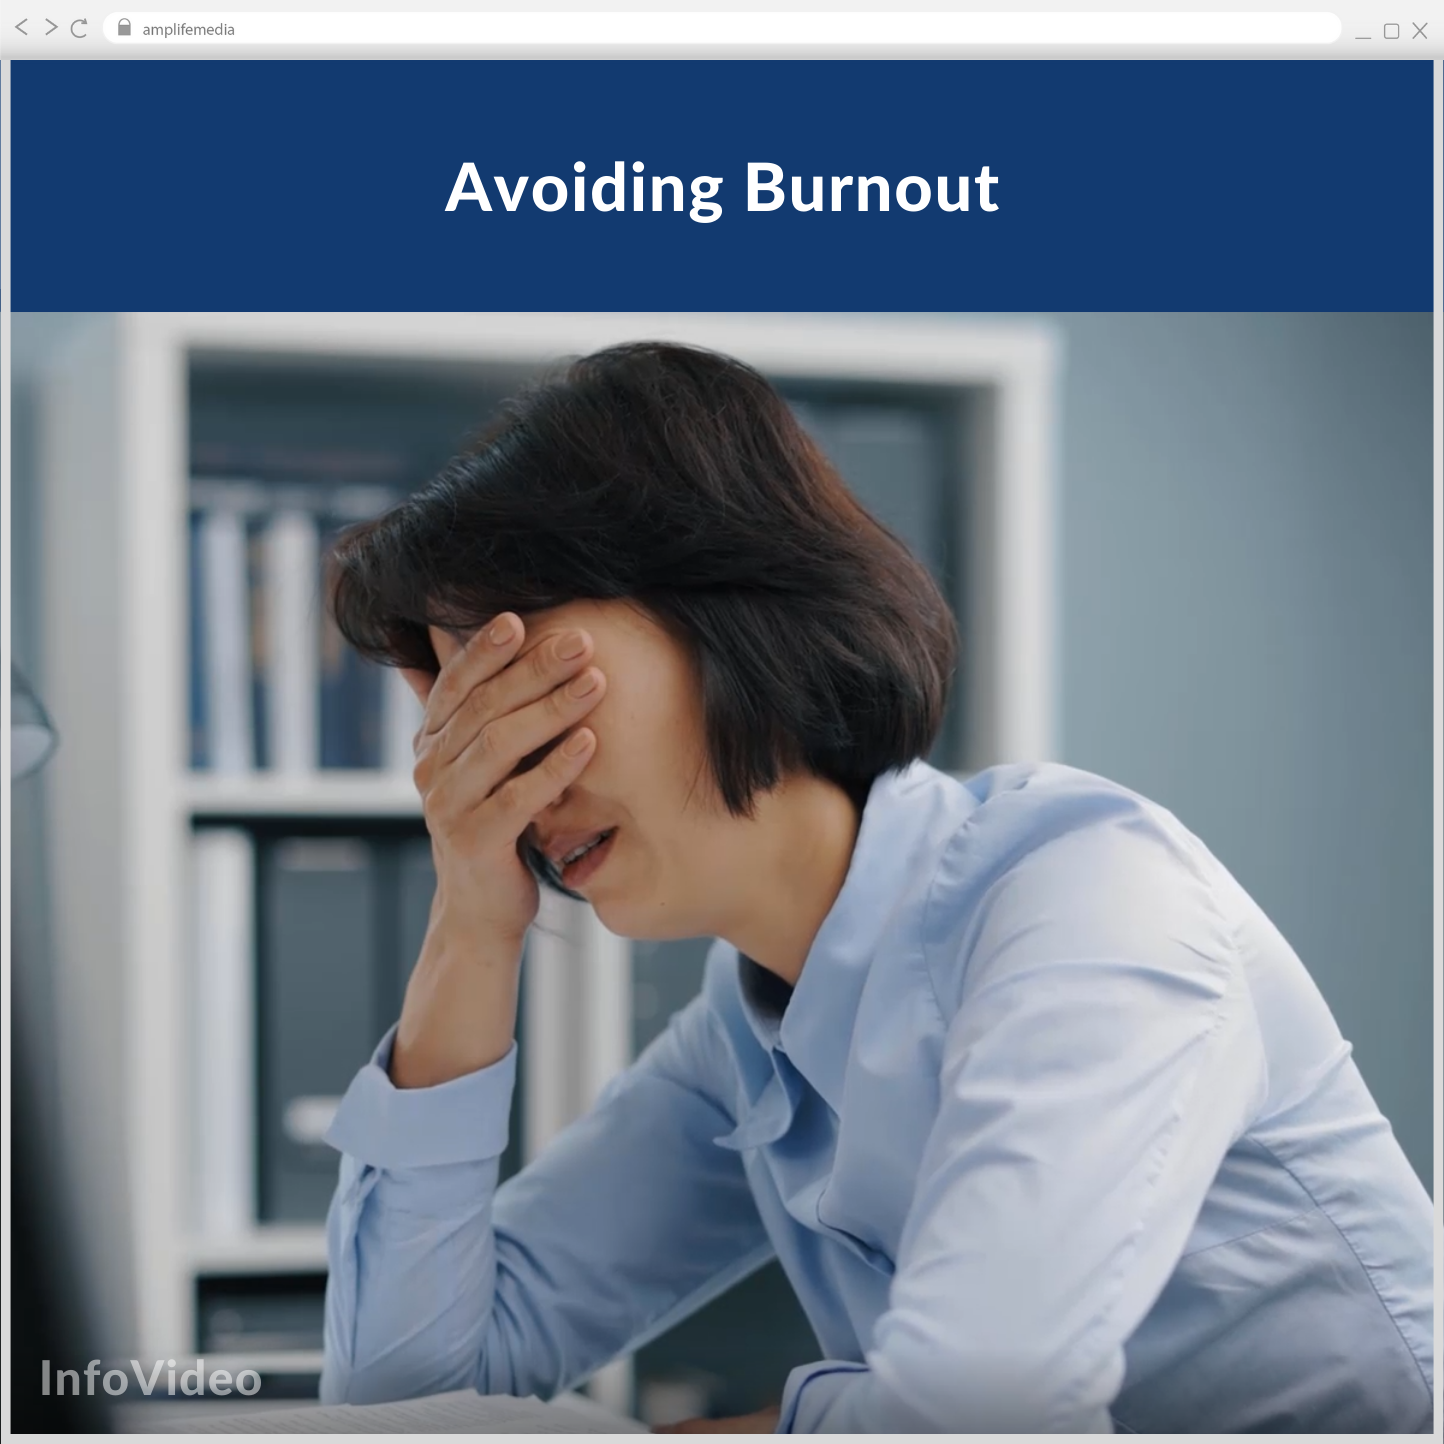 Subscription to Wellbeing Media: Avoiding Burnout IV 421